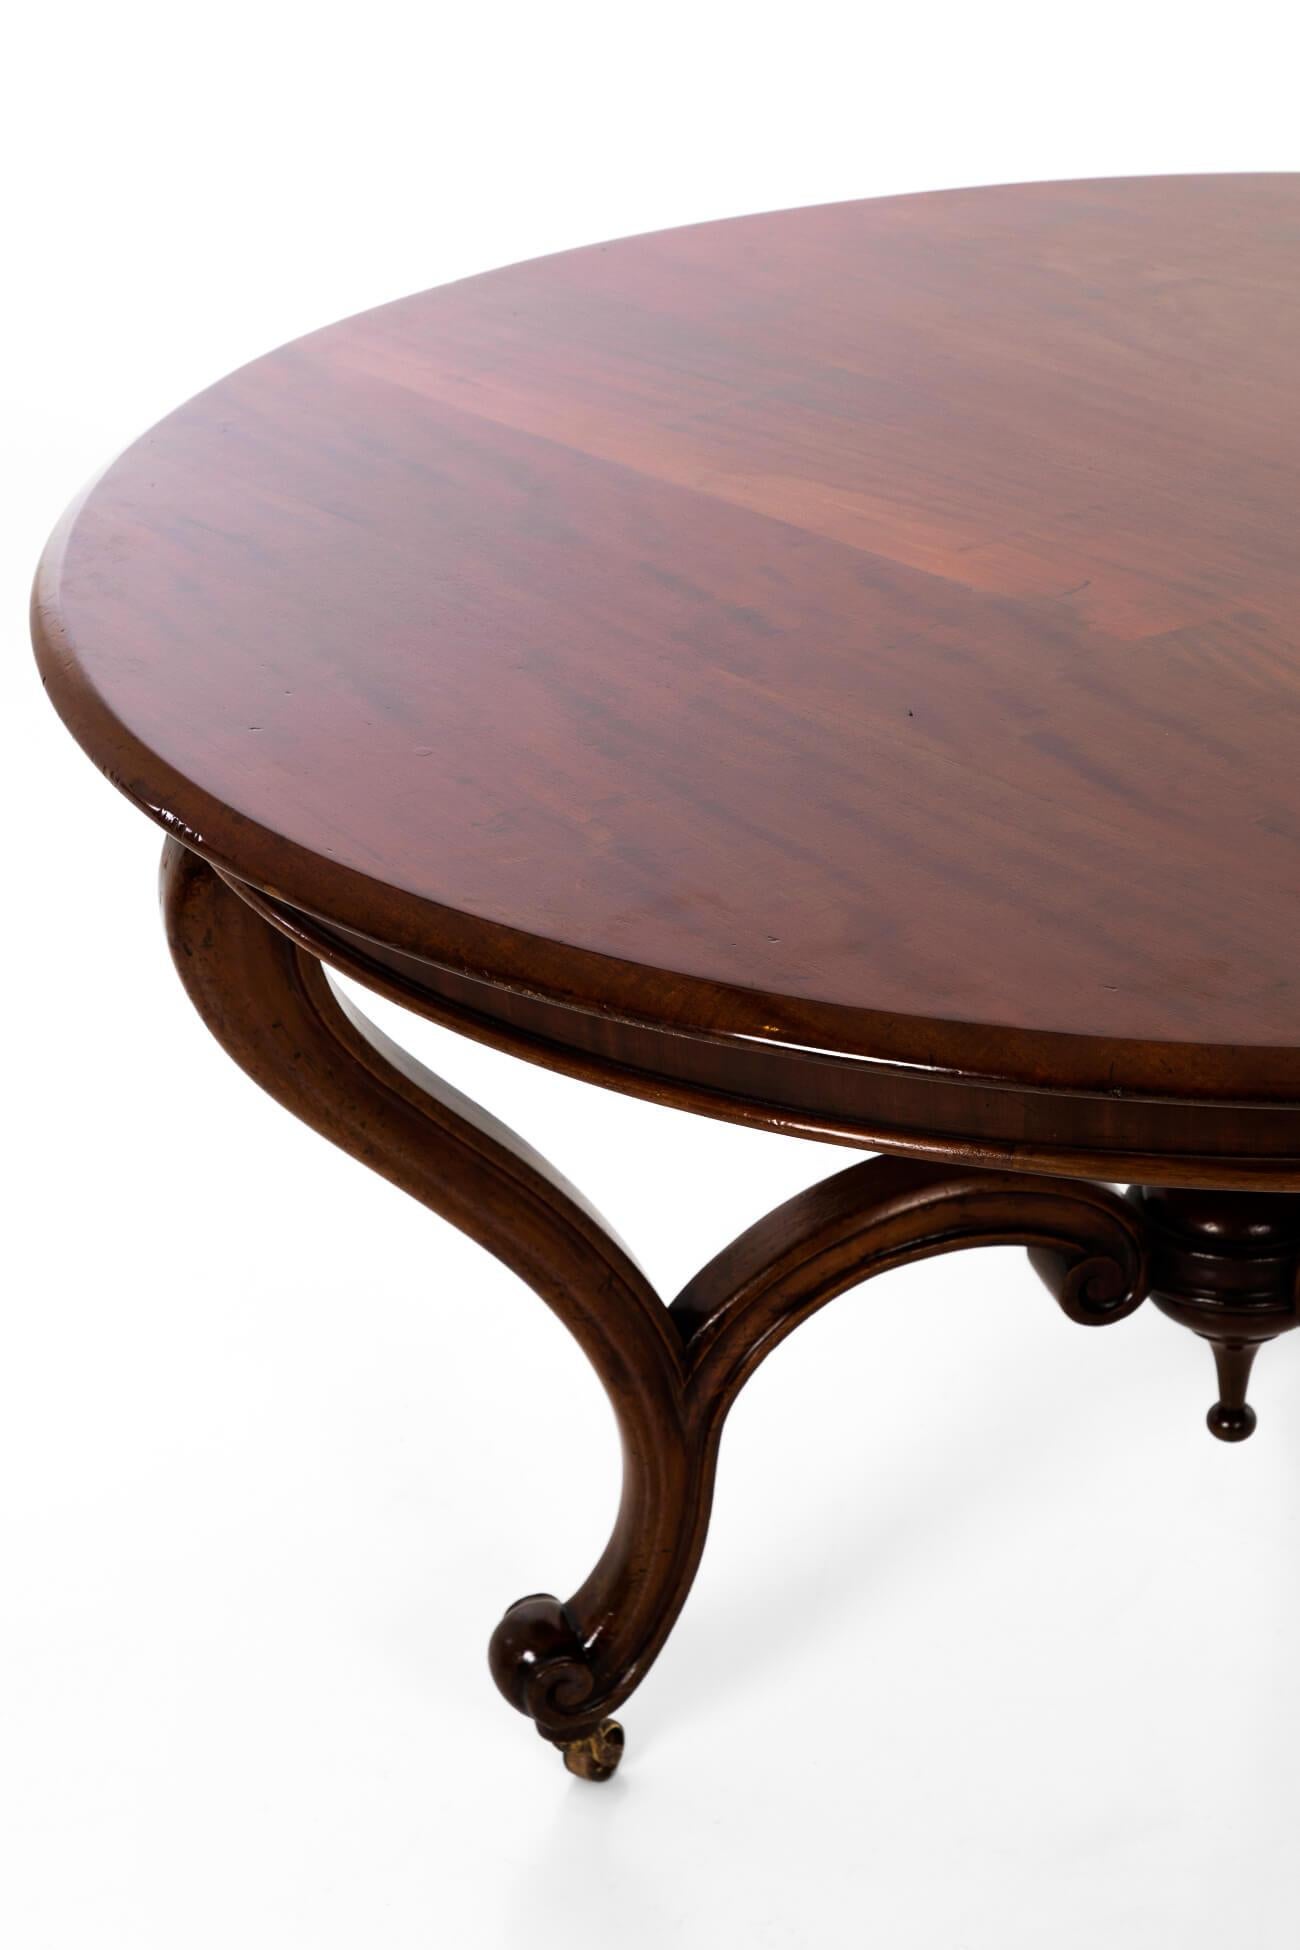 Mid-19th Century Fruitwood Centre Table, circa 1850 For Sale 5